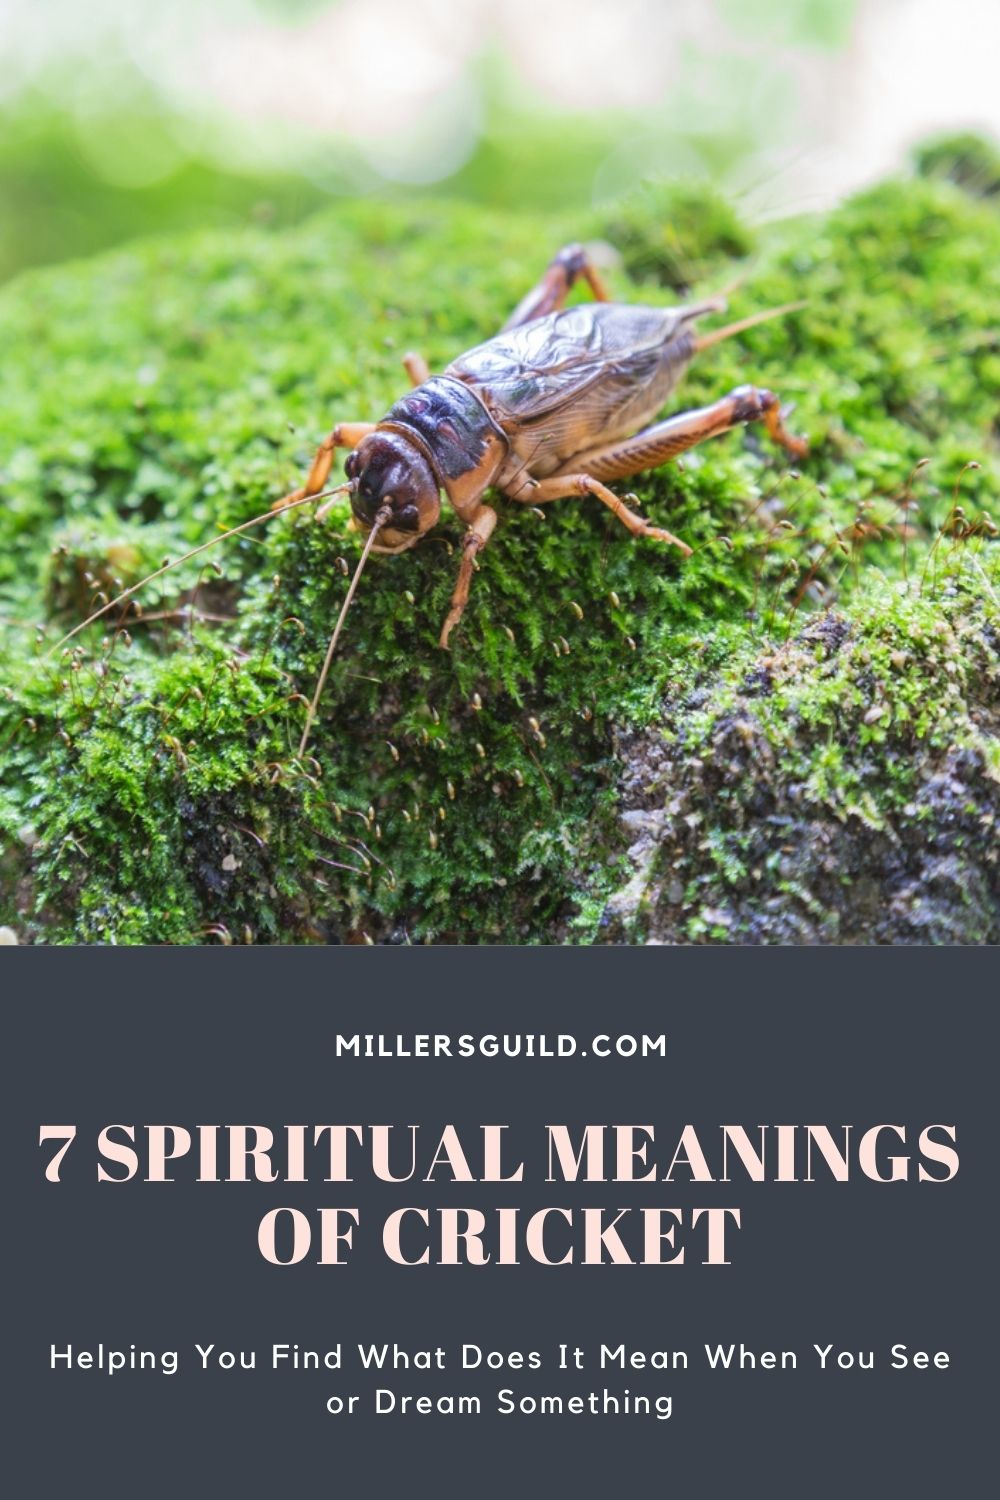 7 Spiritual Meanings of Cricket